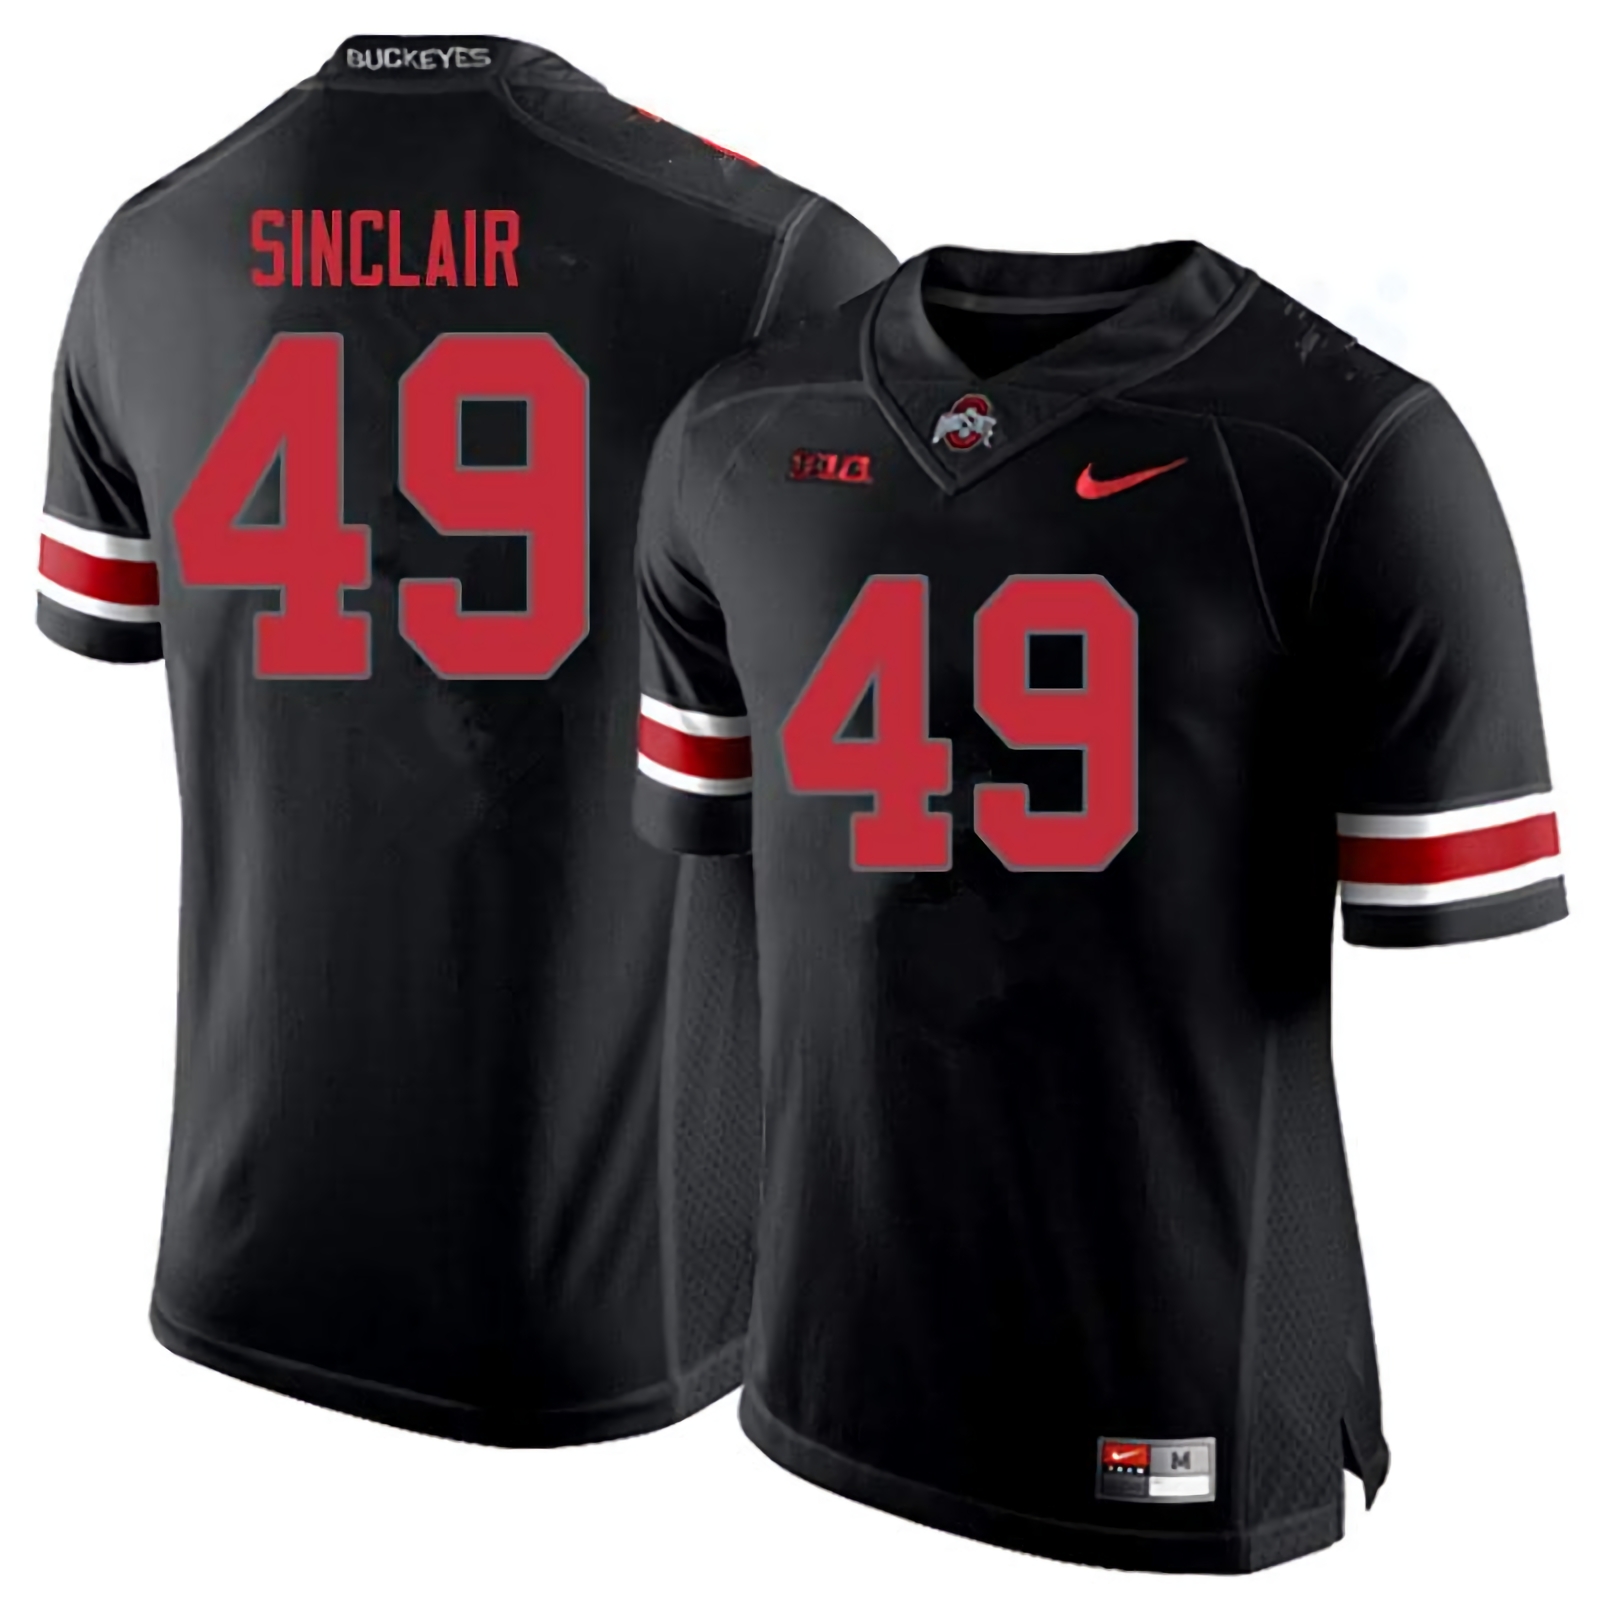 Darryl Sinclair Ohio State Buckeyes Men's NCAA #49 Nike Blackout College Stitched Football Jersey NVS8856FW